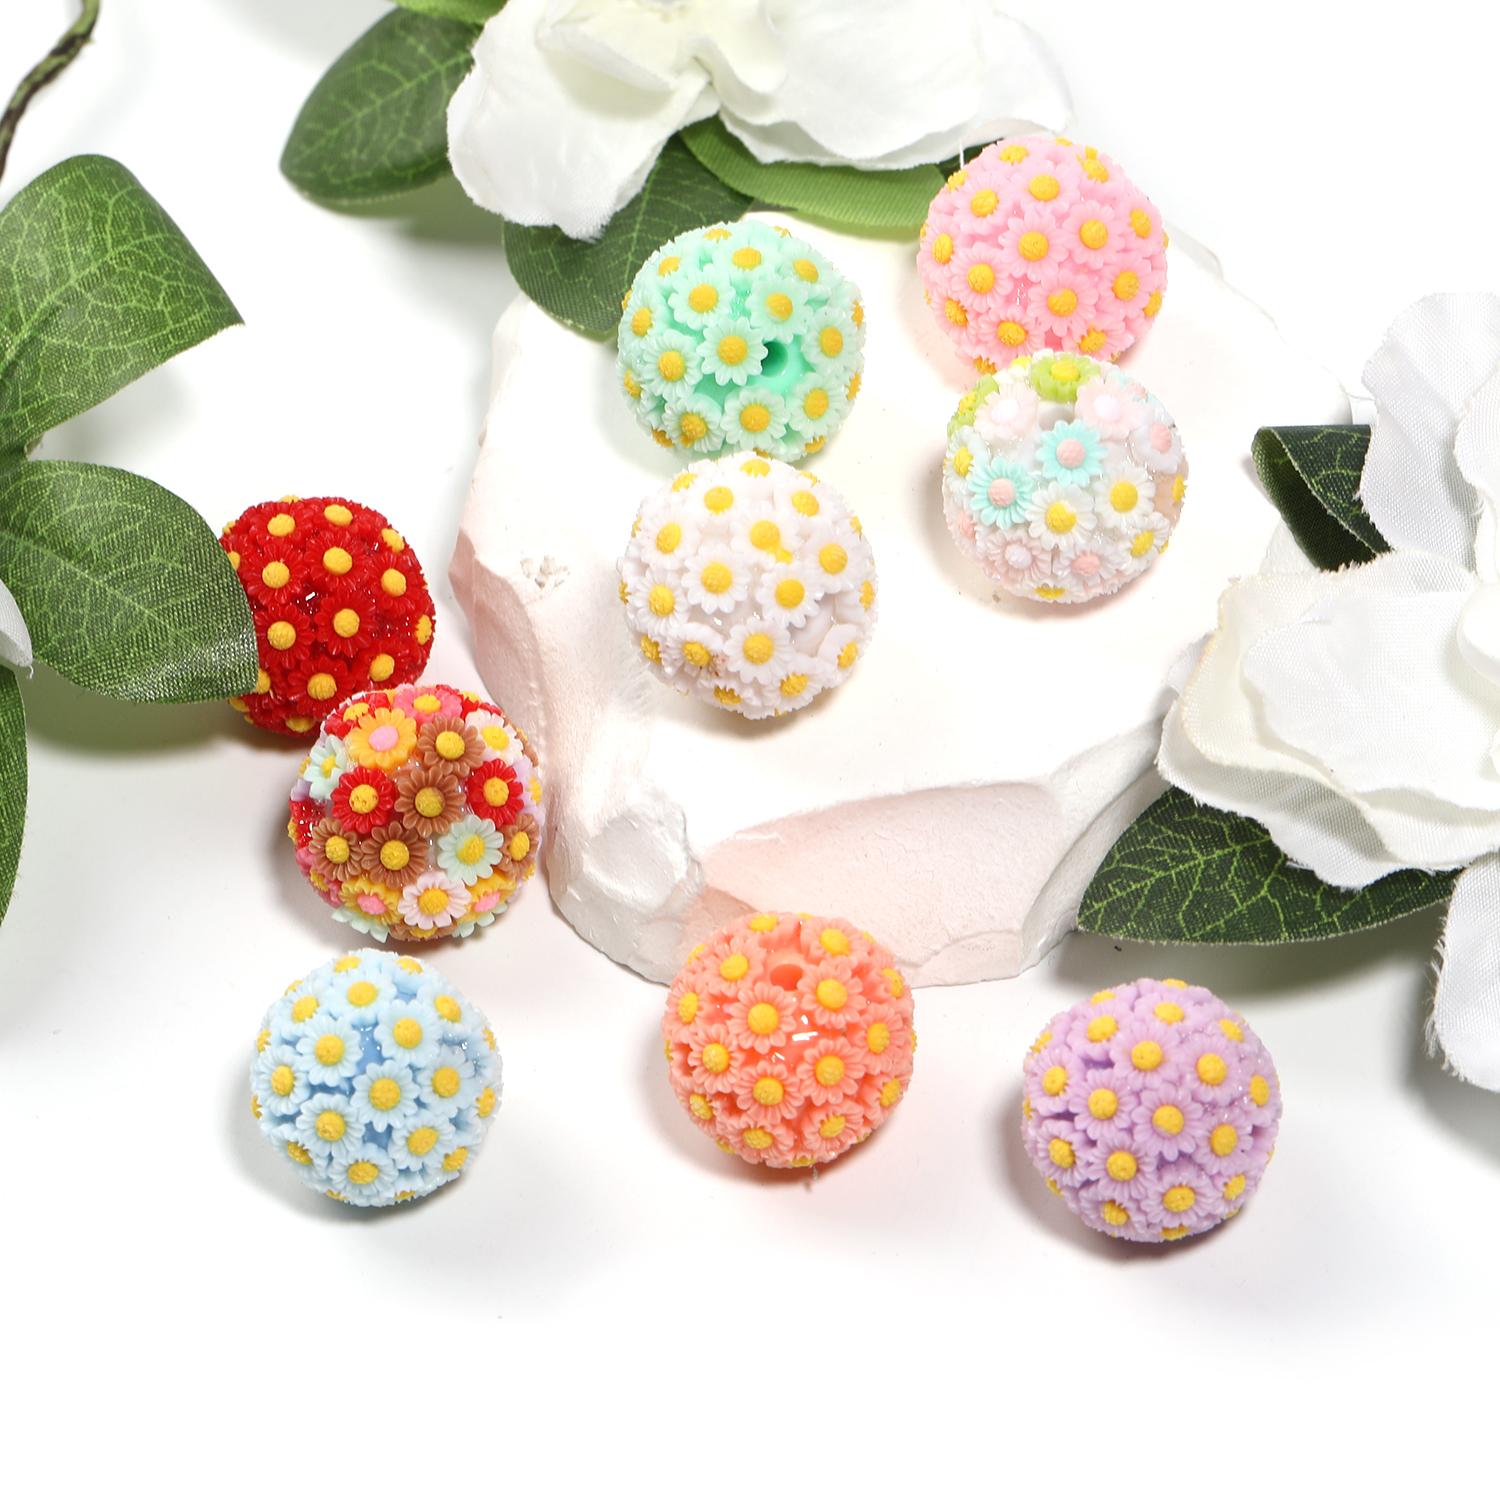 【B104】20Pcs Resin flower round ball earrings hair accessories diy accessories jewelry materials-JPM